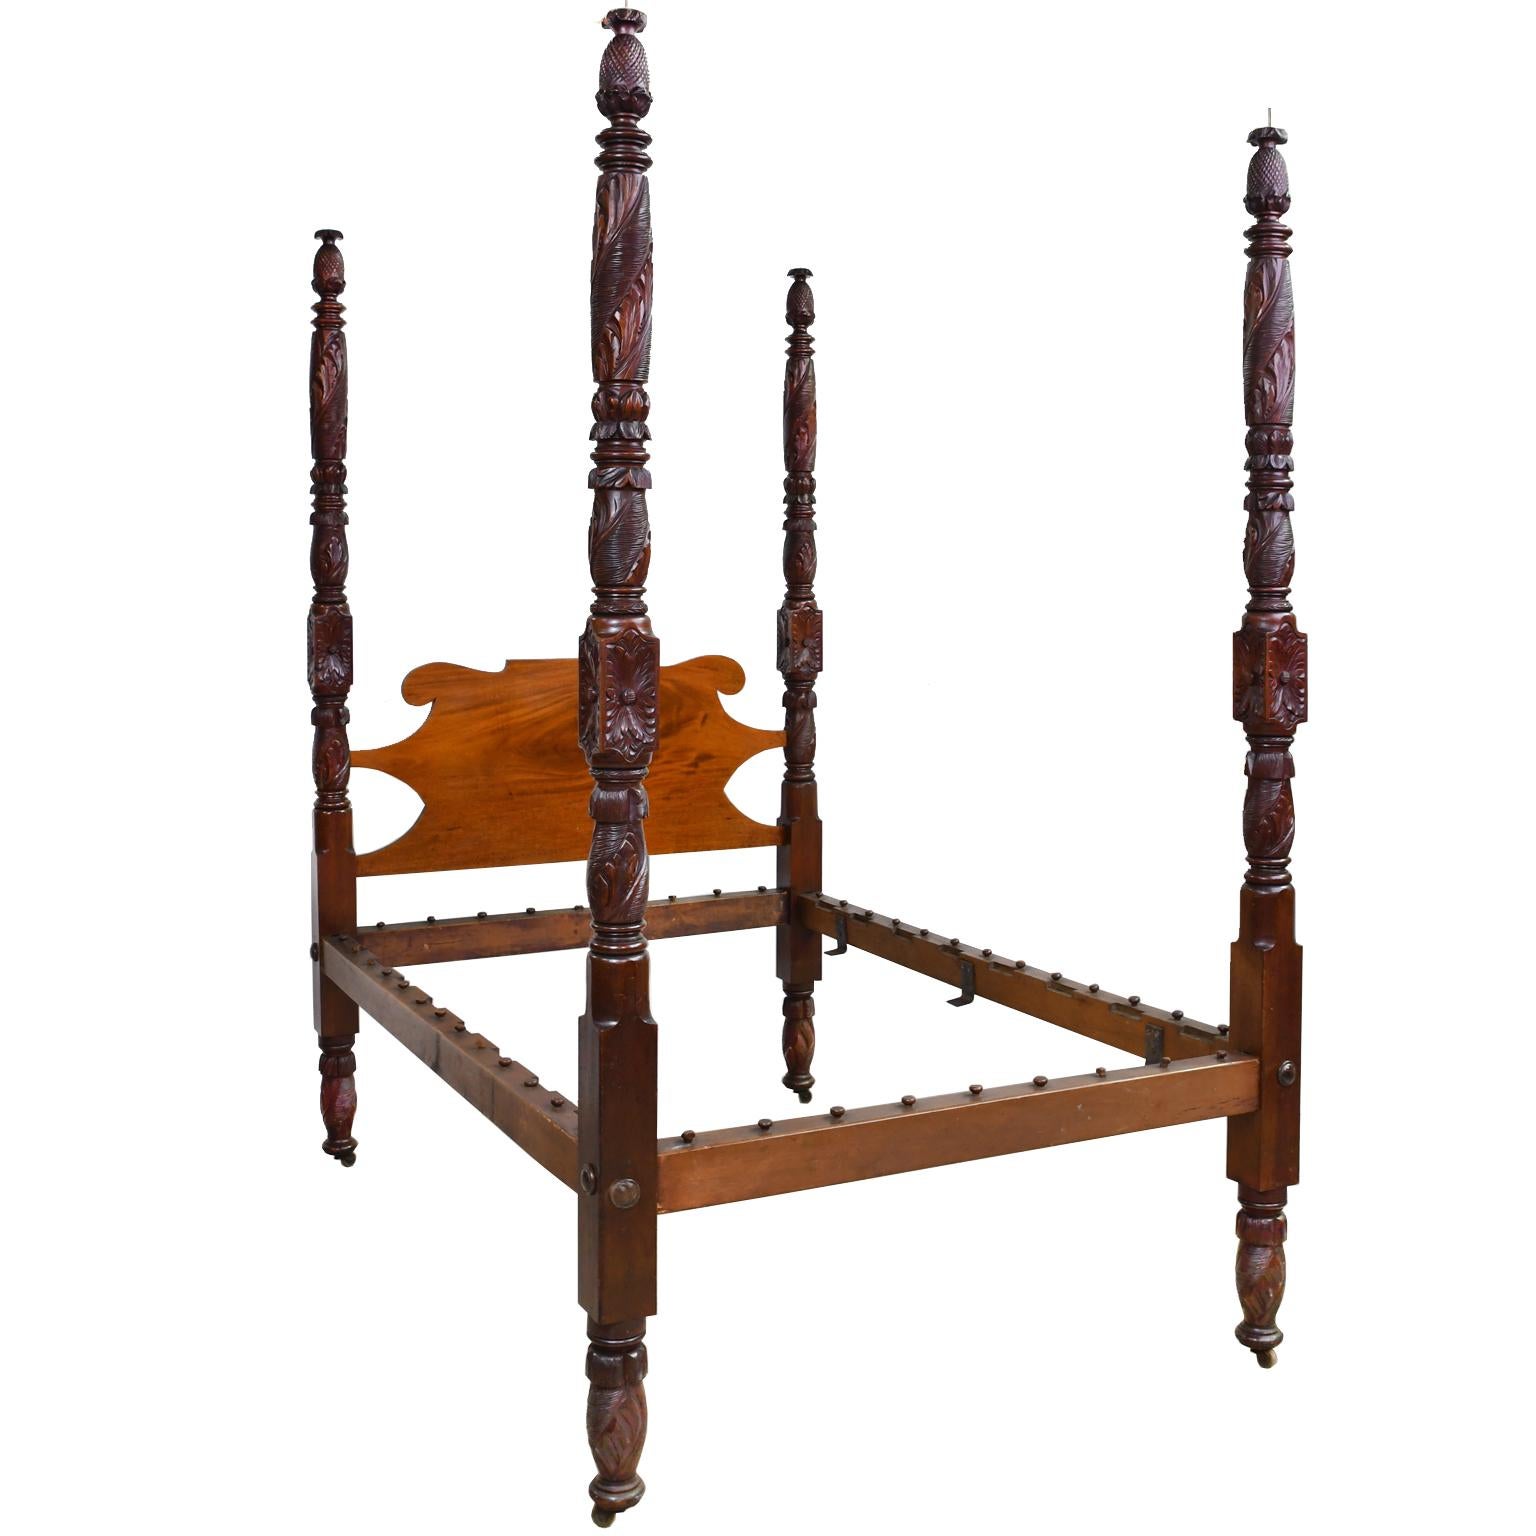 A very finely carved American Empire four poster bed. At the top of each post is a carved pineapple, the emblem of hospitality, and under these are ringed turnings followed by round turnings with acanthus carvings, and carved blocks with rosettes,